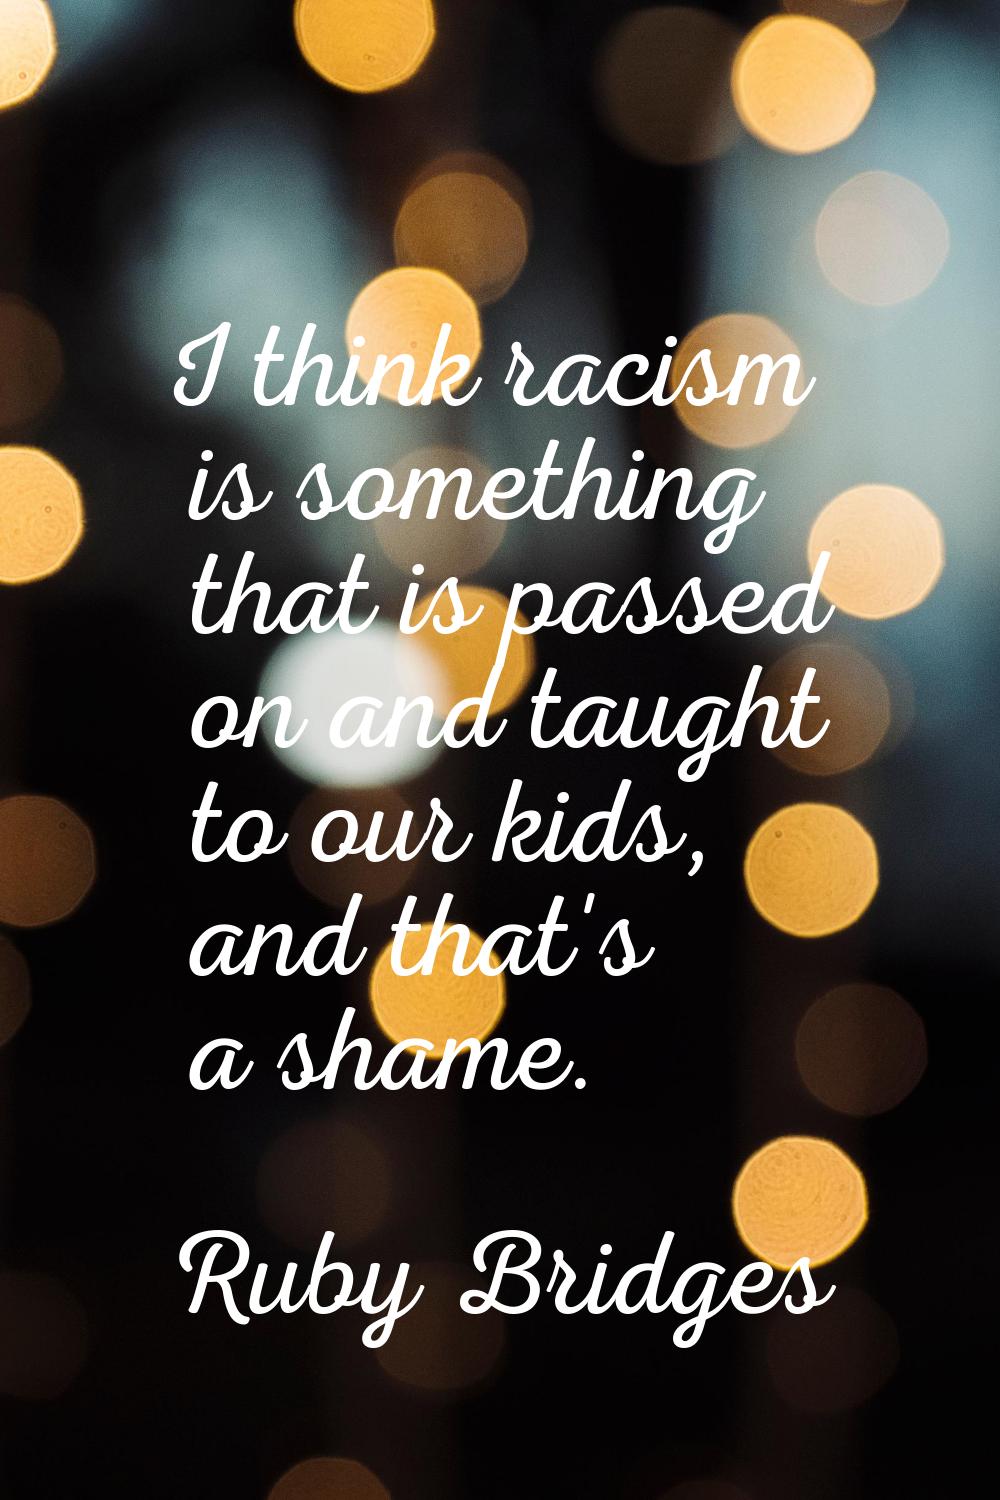 I think racism is something that is passed on and taught to our kids, and that's a shame.